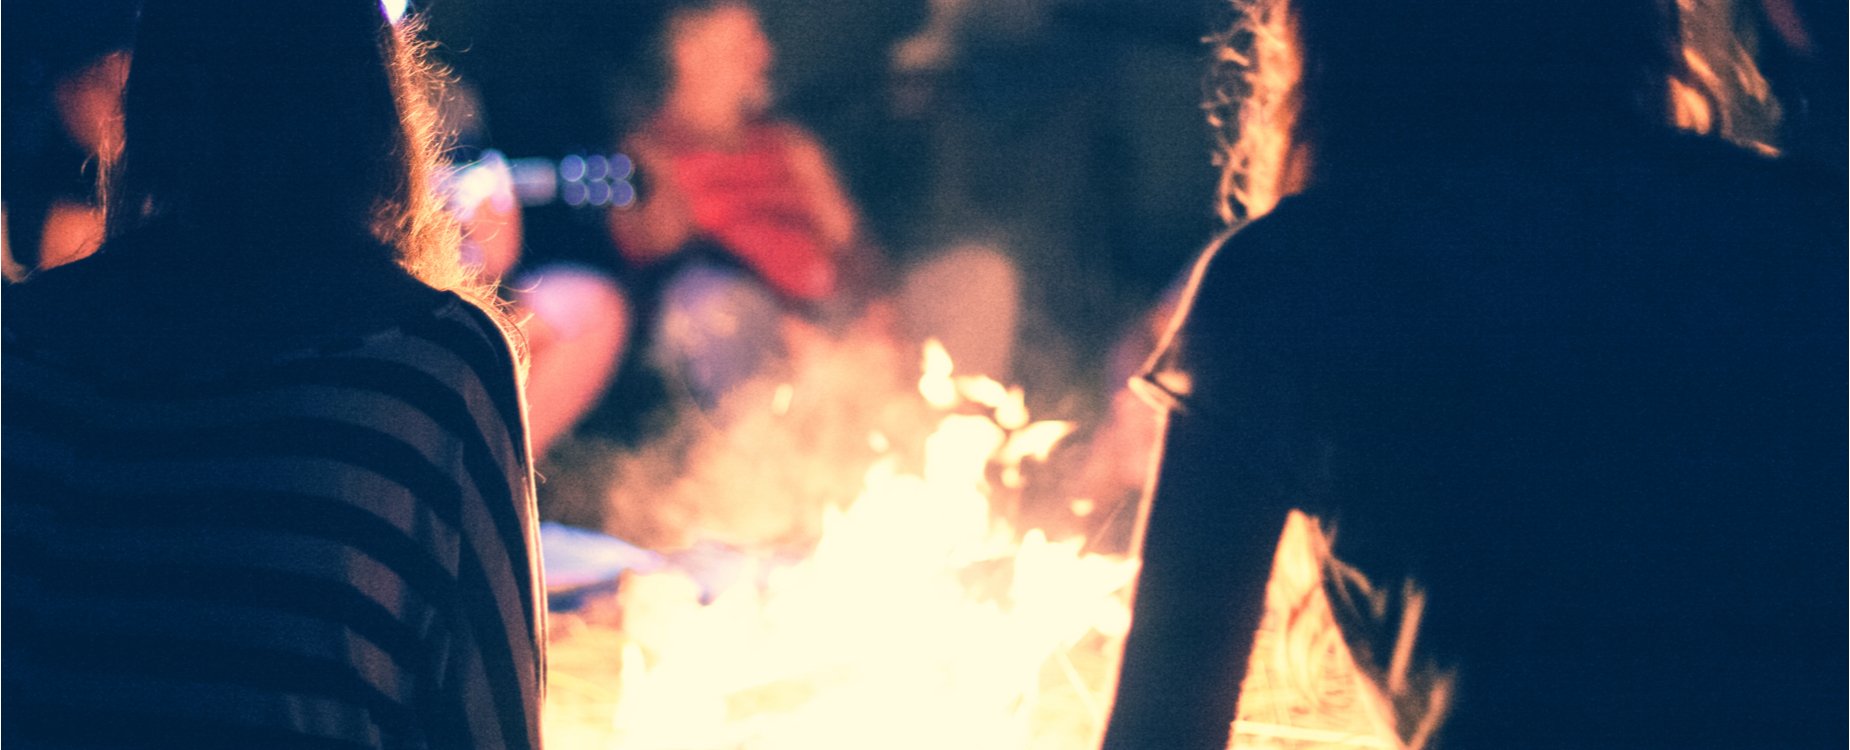 Banner image showing people round a campfire